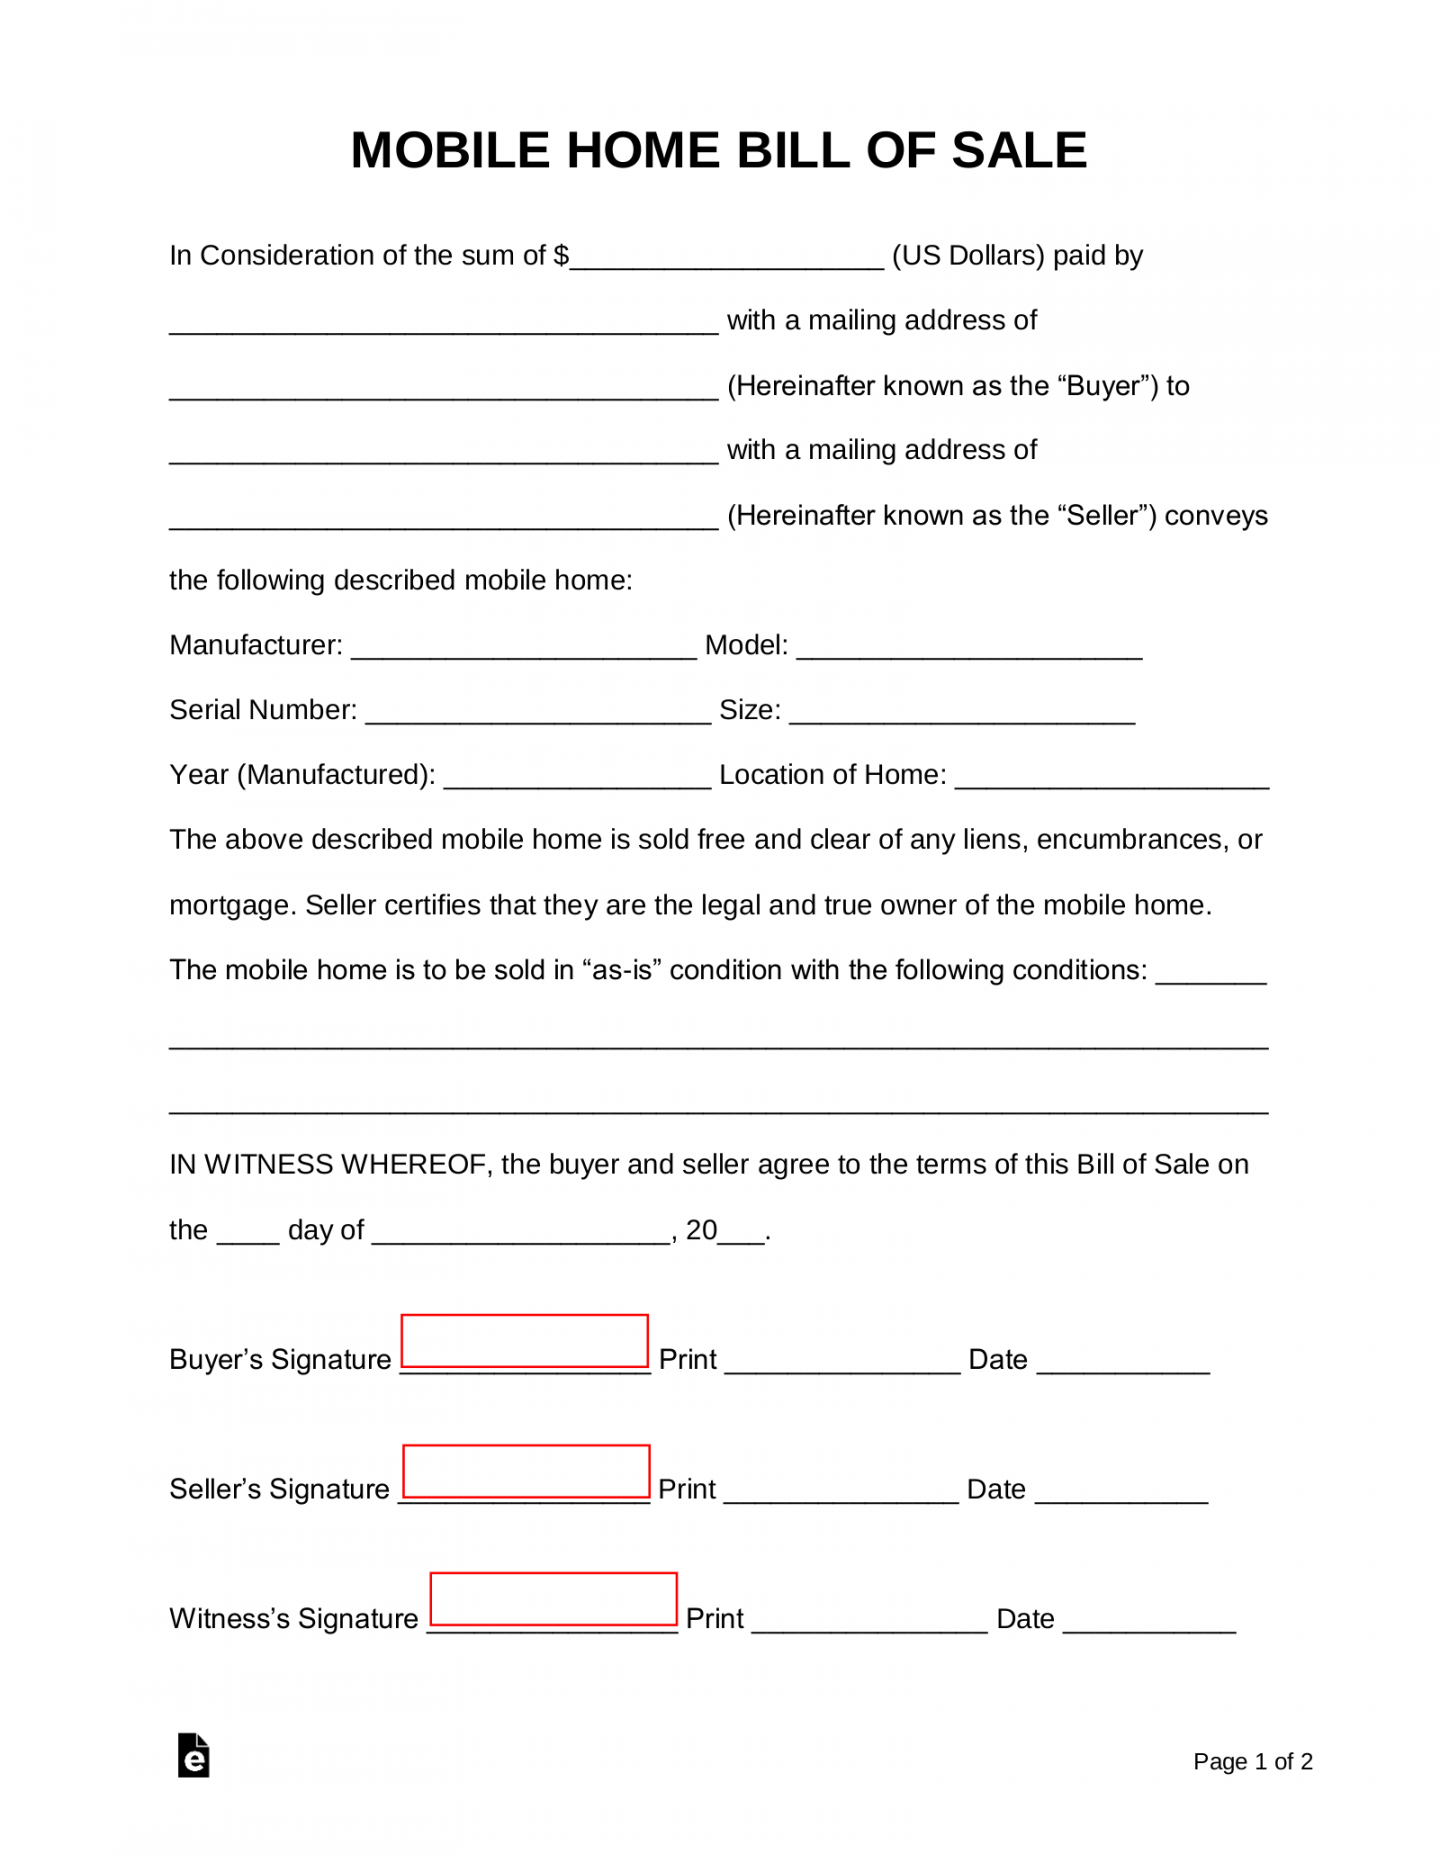 Free Mobile (Manufactured) Home Bill of Sale Form - PDF  Word  - FREE Printables - Free Printable Bill Of Sale For Mobile Home